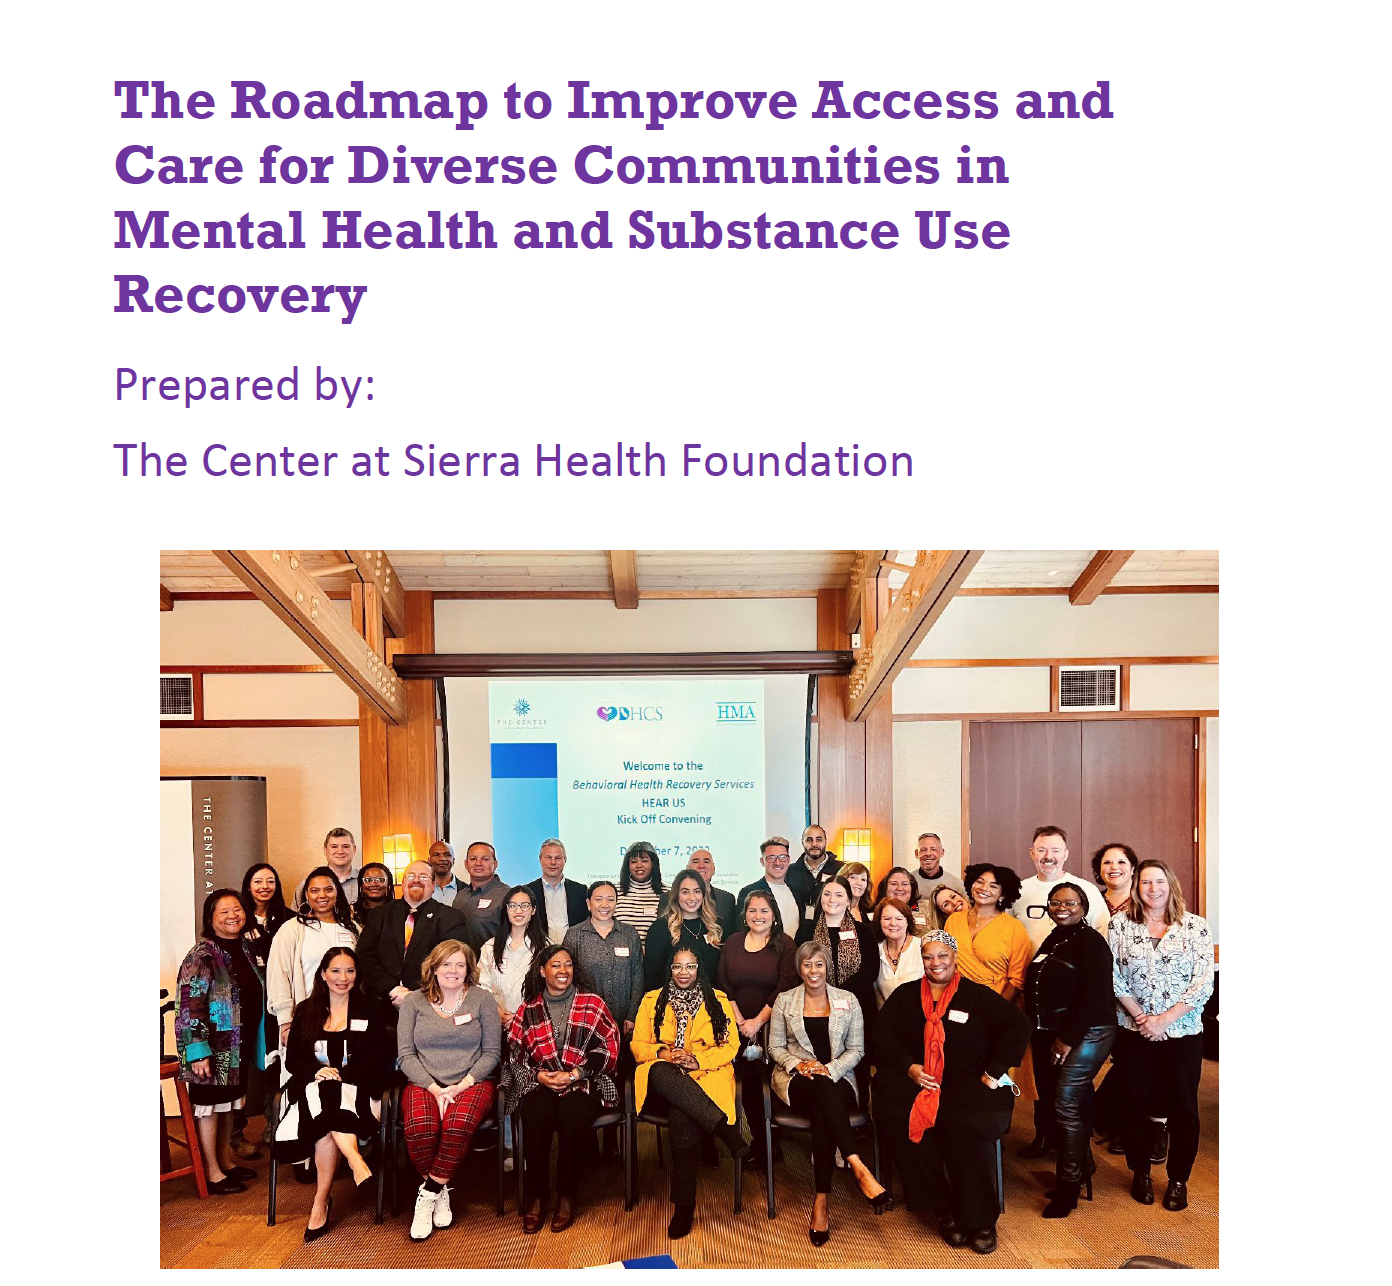 Pictured: The cover of The Roadmap to Improve Access and Care for Diverse Communities in Mental Health and Substance Use Recovery